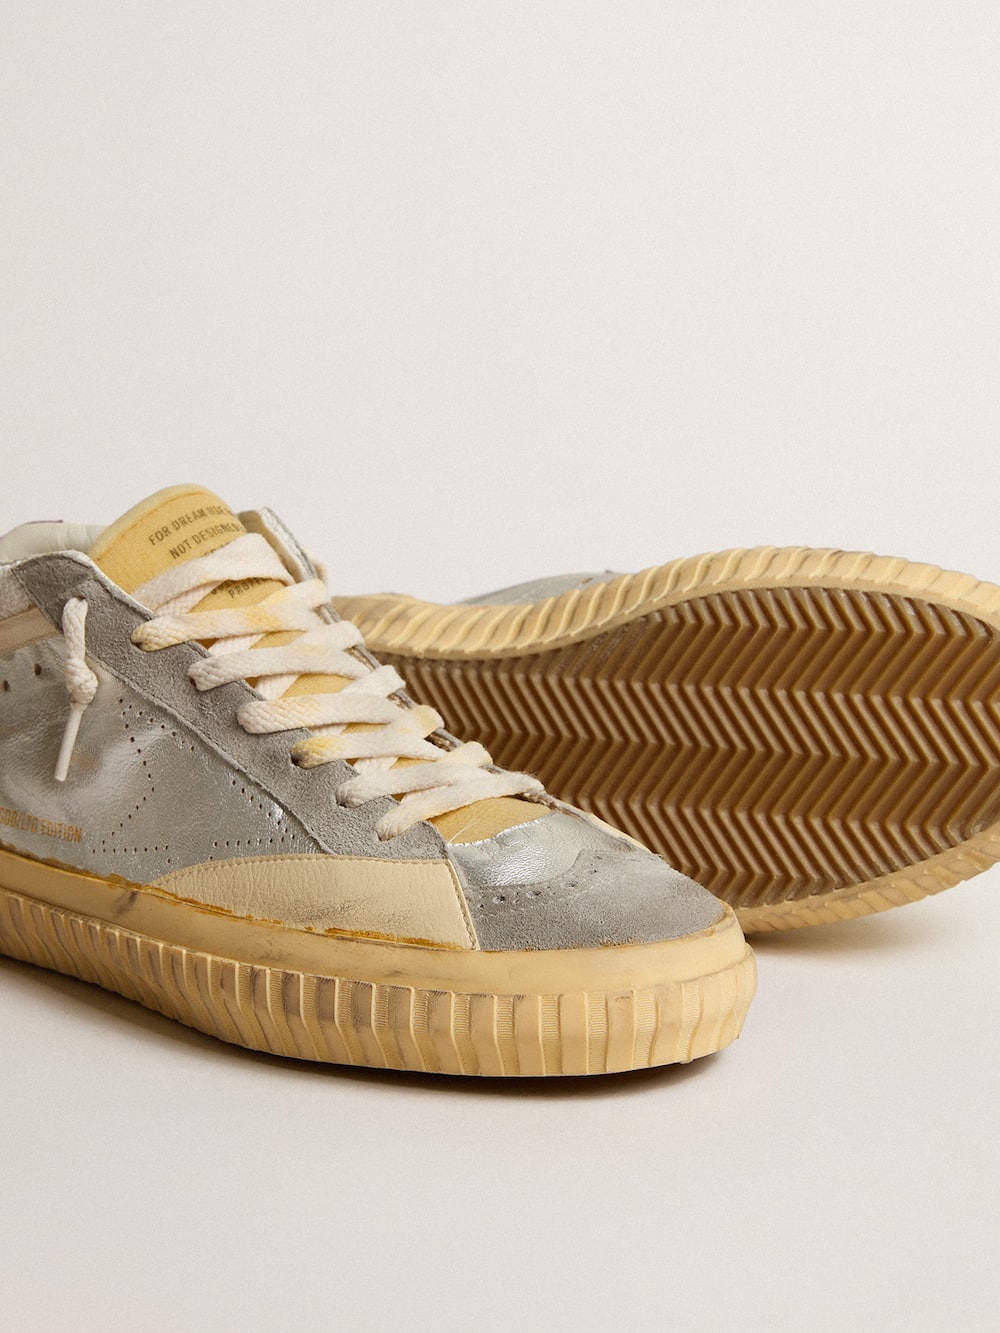 Golden Goose - Mid Star LAB in silver metallic leather and mesh with perforated star in 